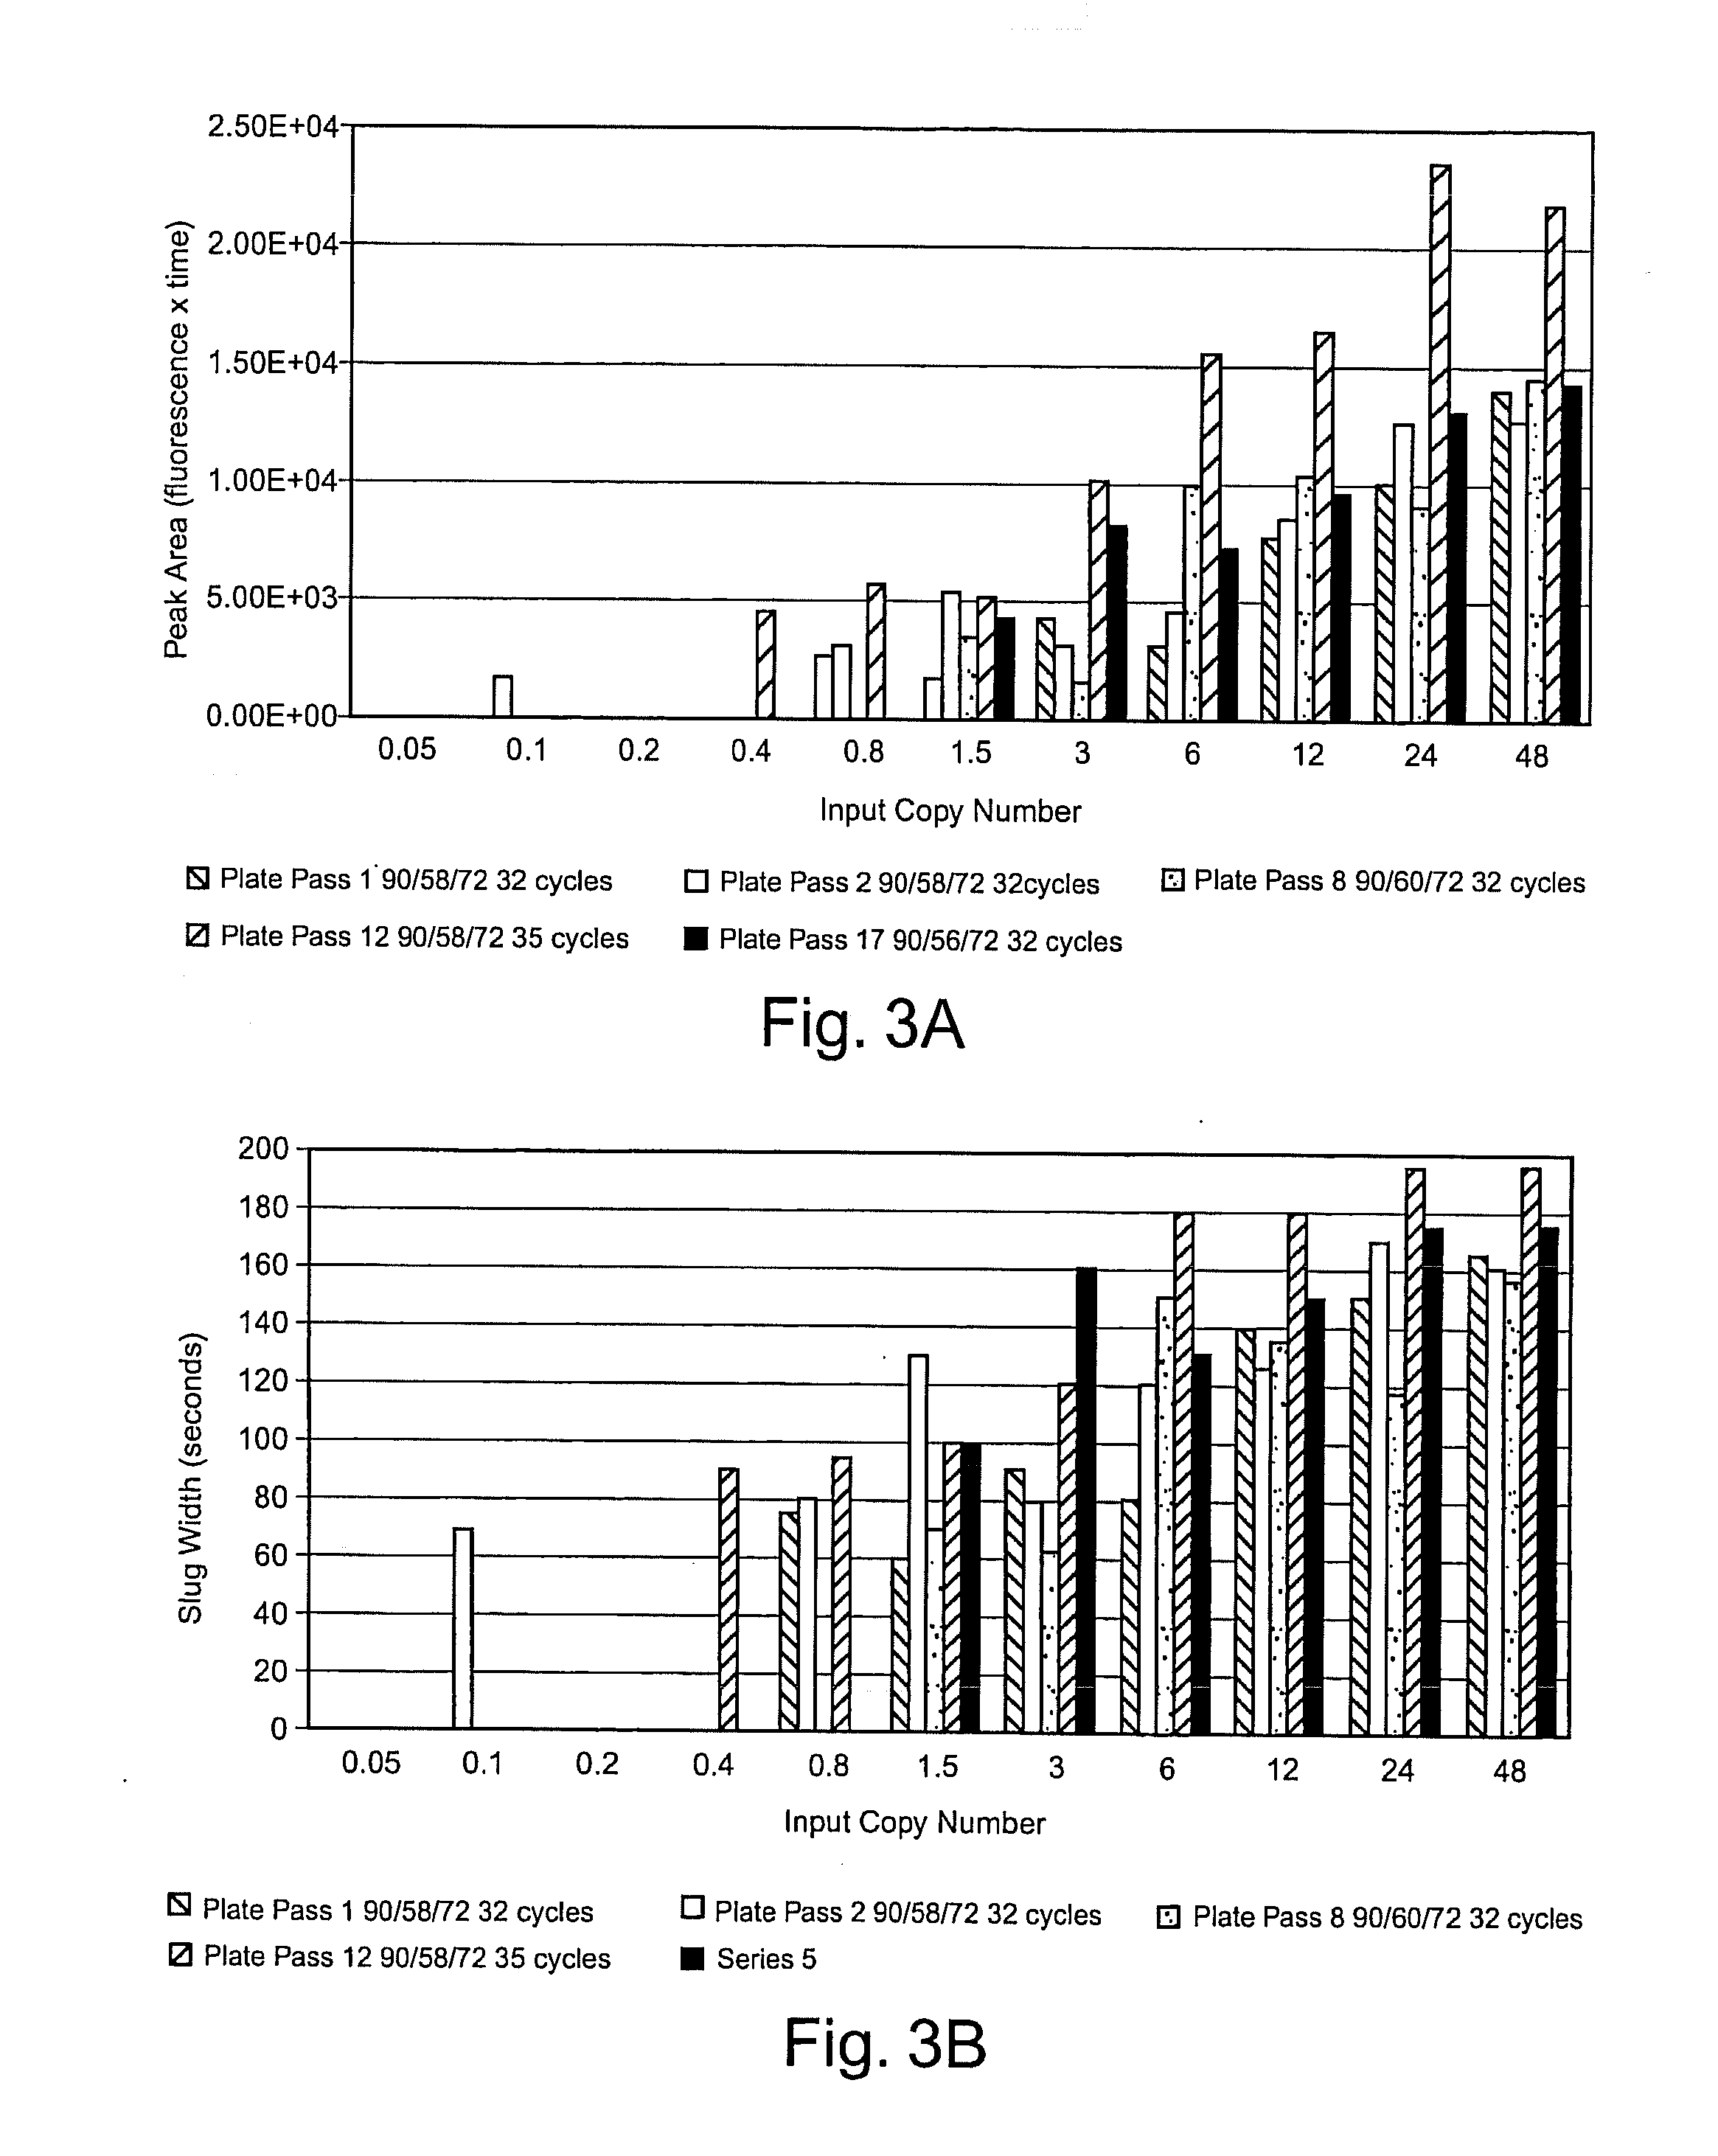 System for differentiating the lengths of nucleic acids of interest in a sample